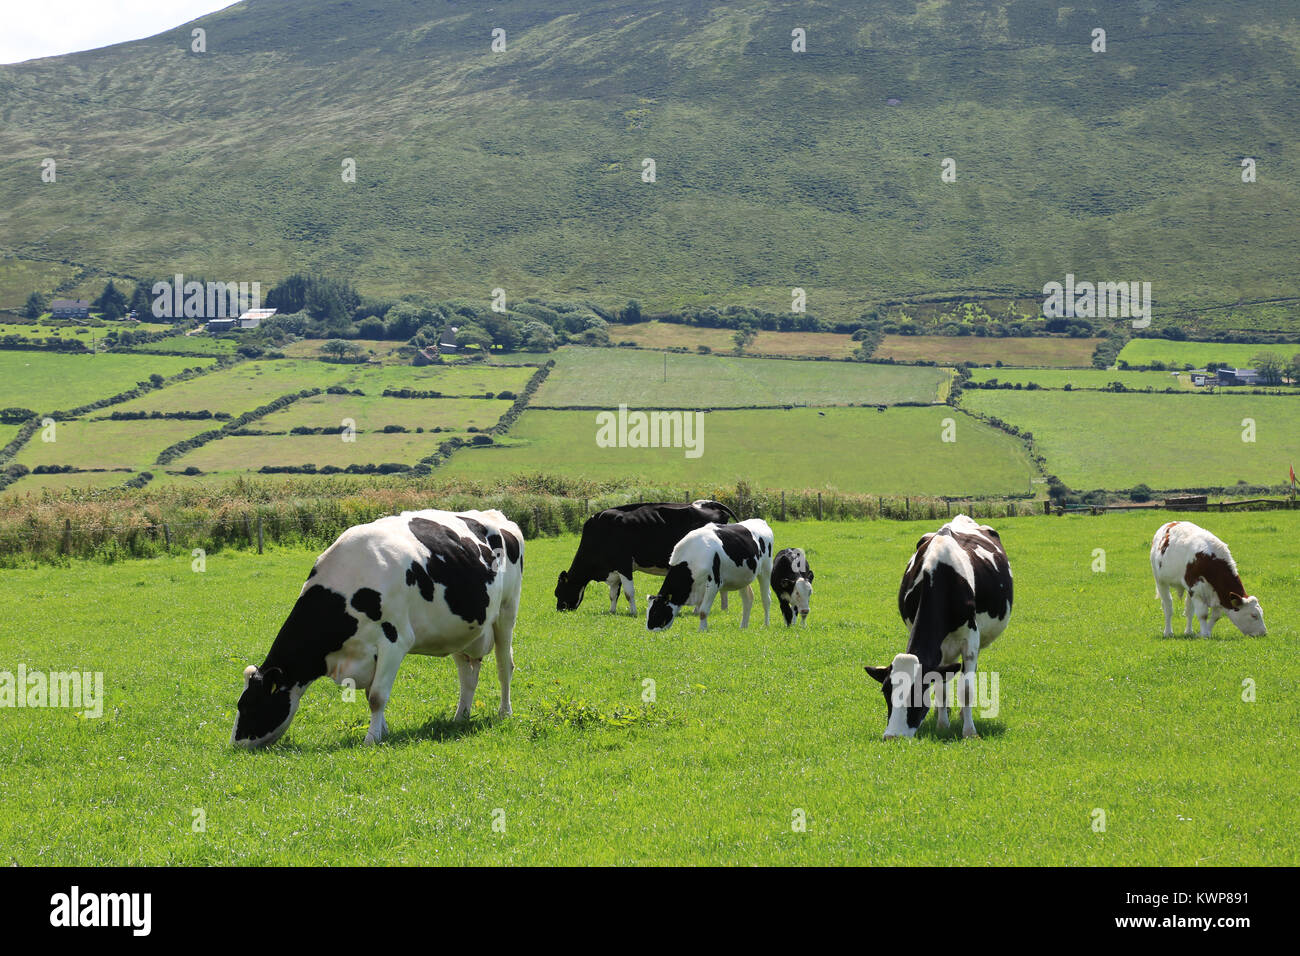 Cow, Cows grazing in a field in Ireland. Stock Photo